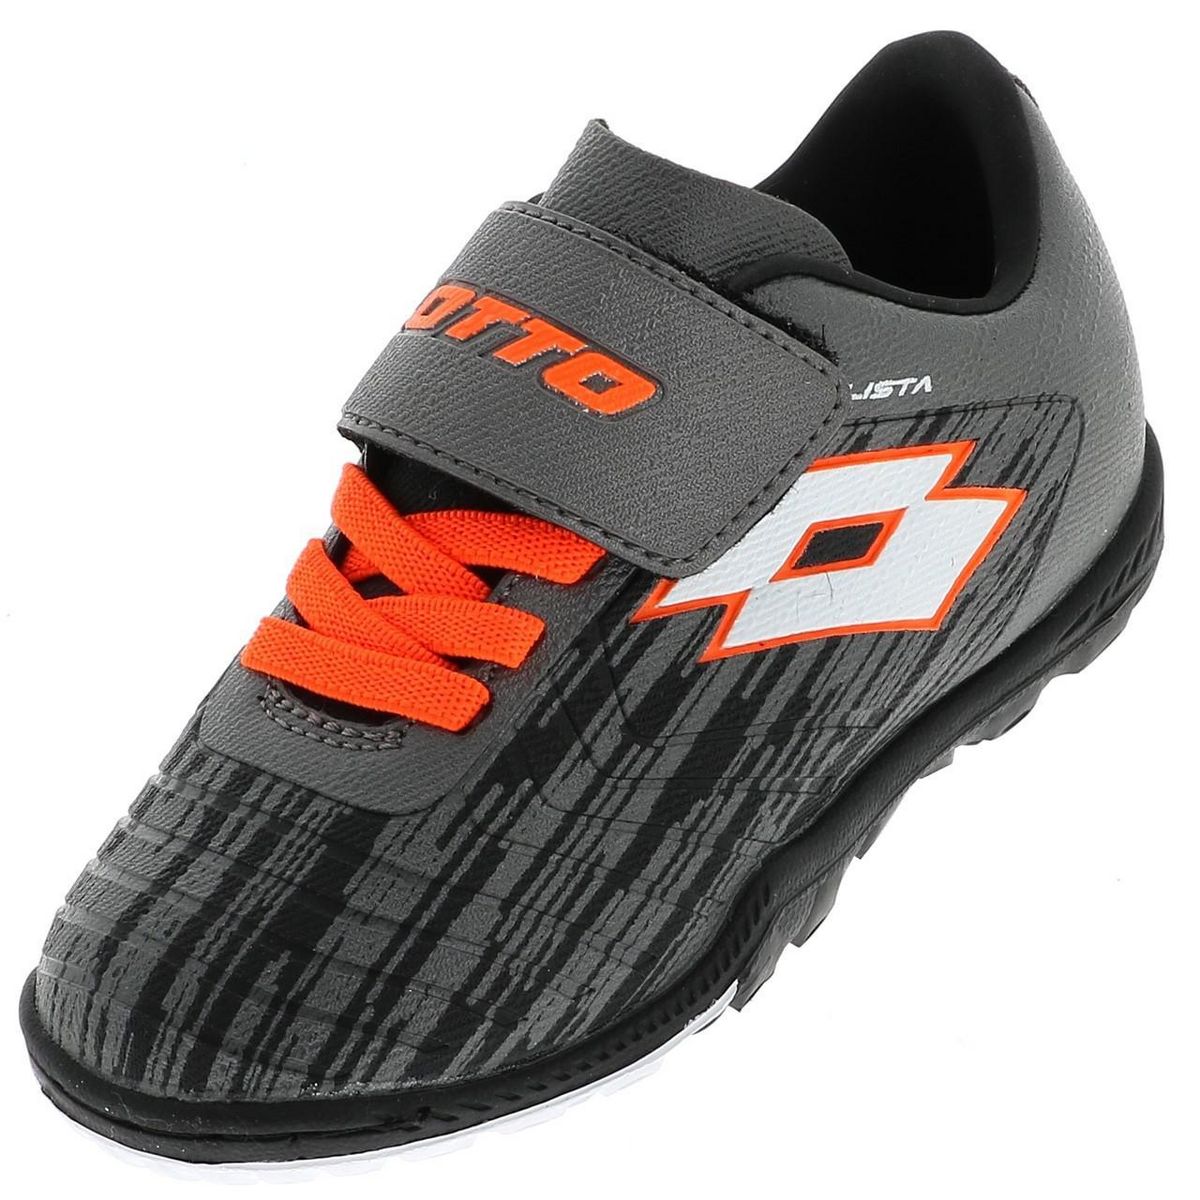 LOTTO Chaussures football stabilisées Lotto Solista 700 iii turf  57445